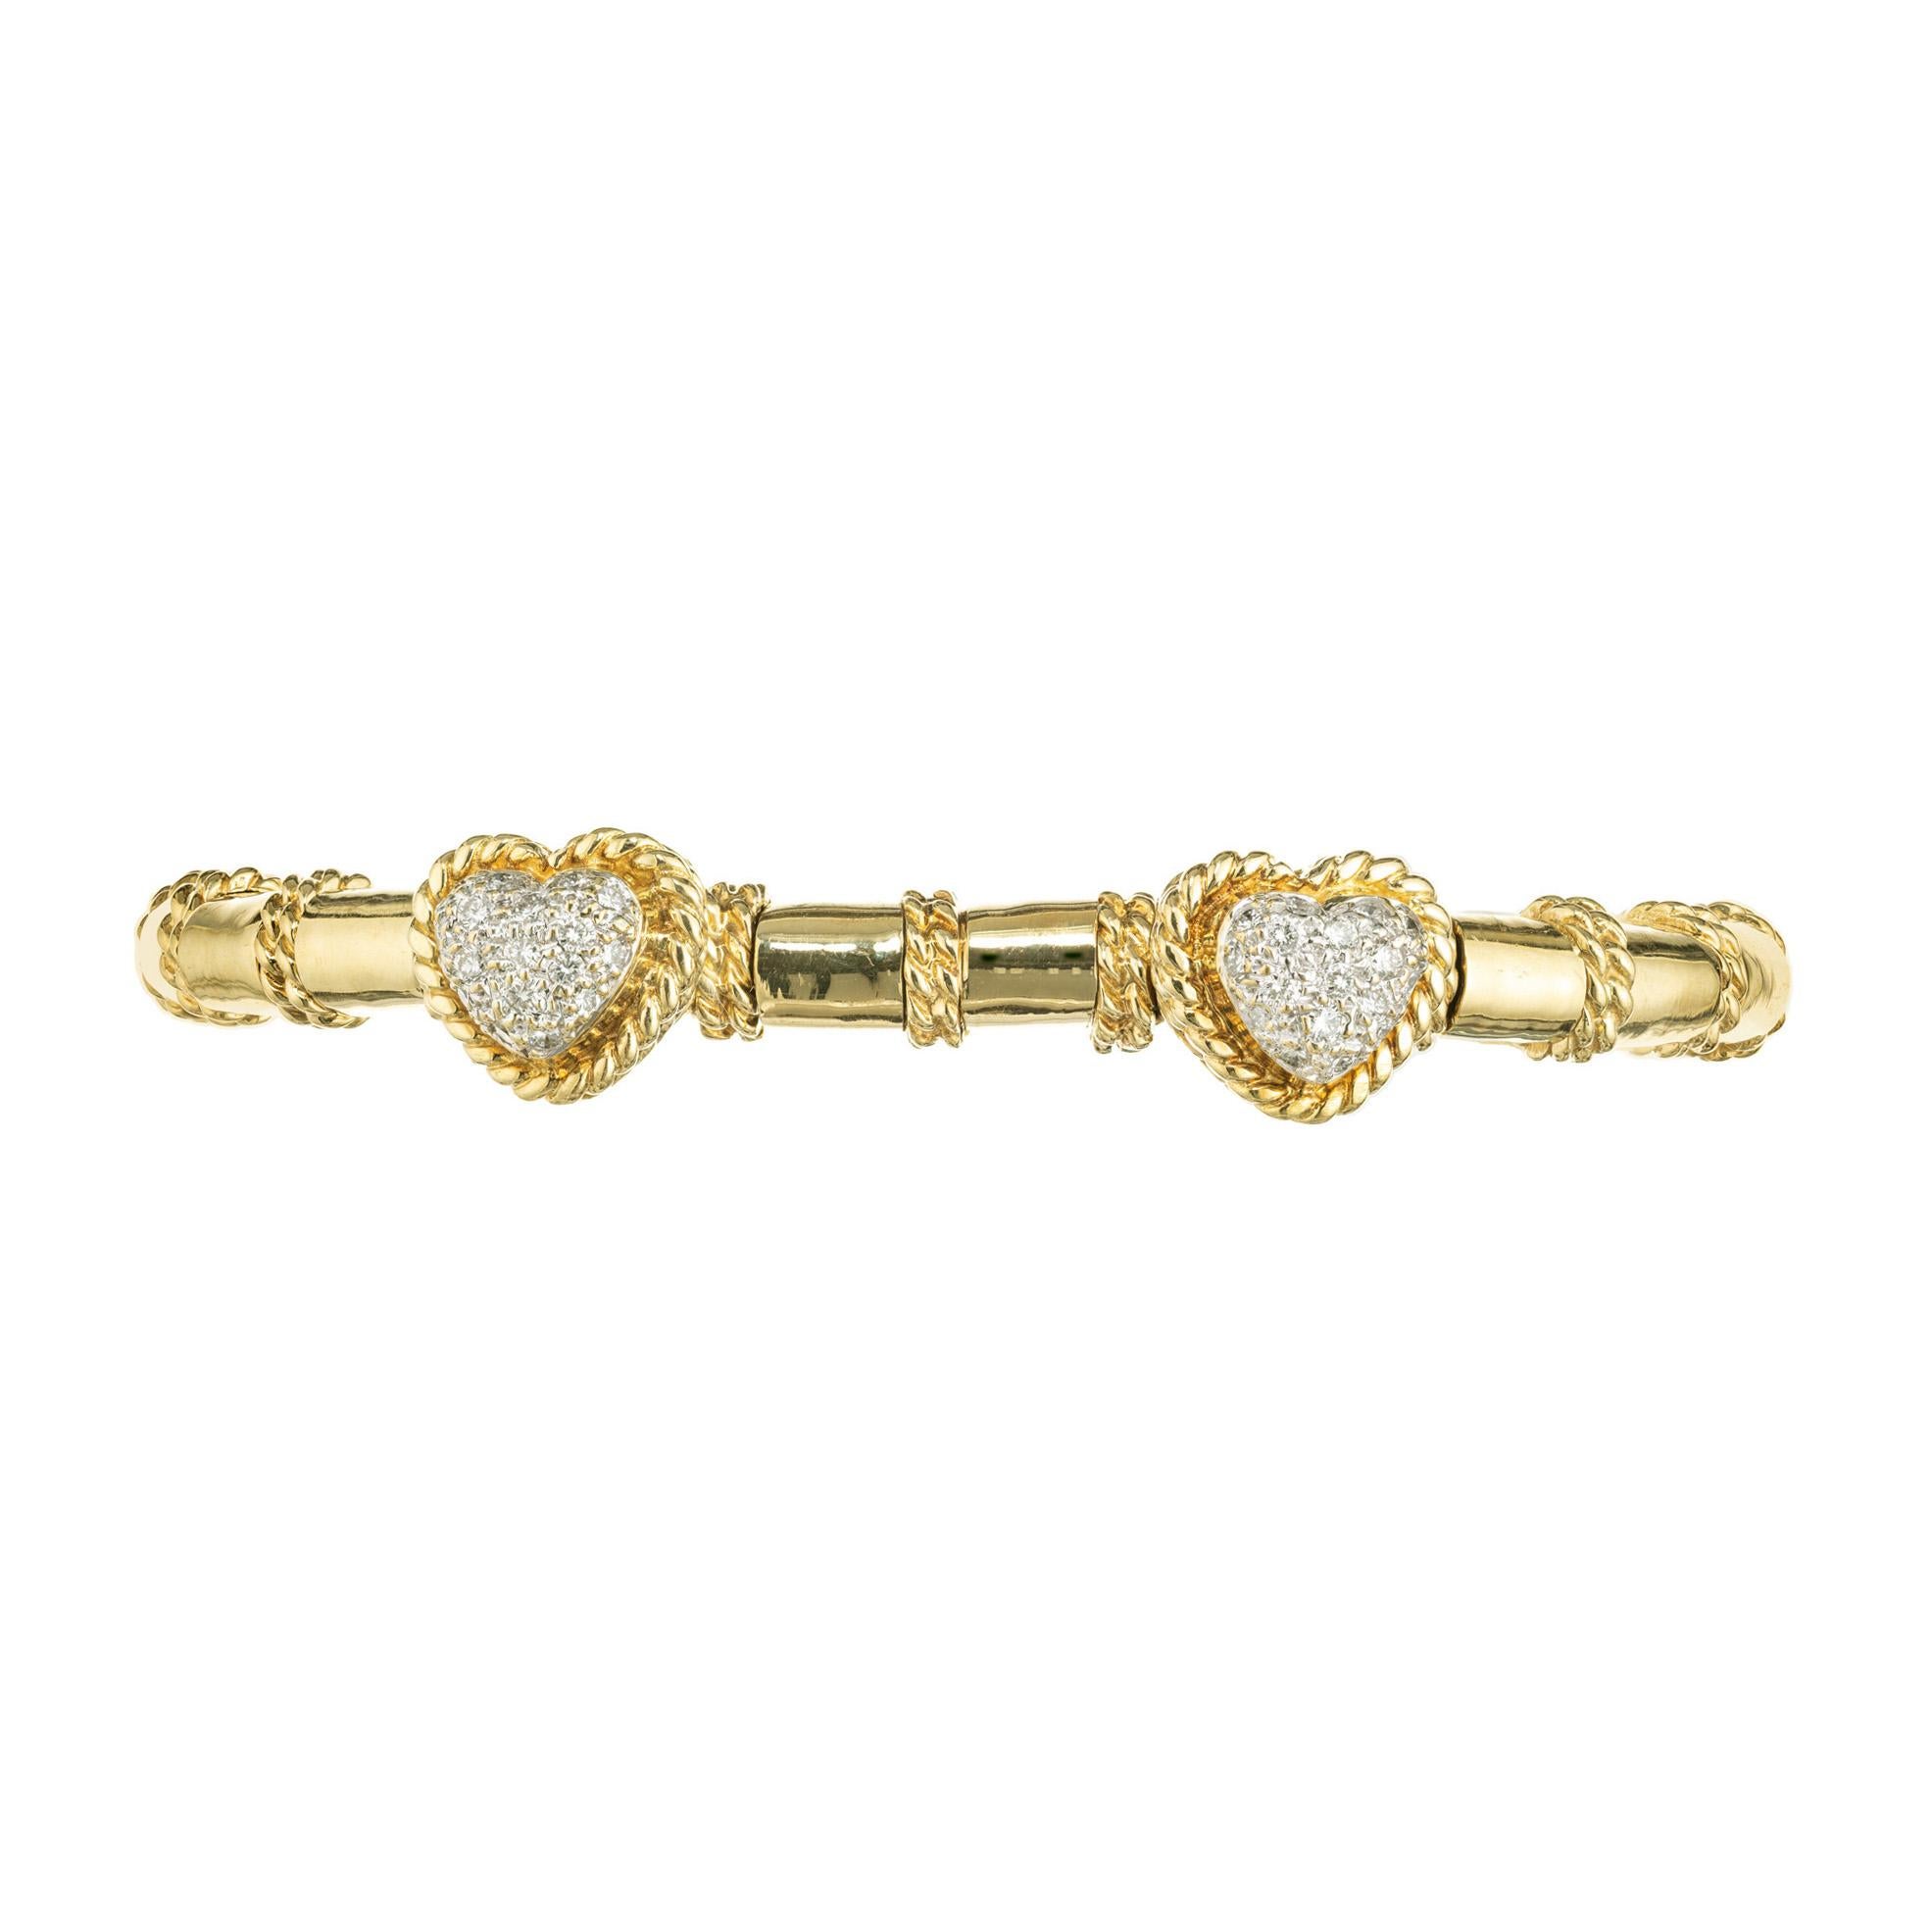 Cassis diamond dangle heart bracelet. 34 round full cut diamonds set in double twisted gold wire heart shapes, set along an 18k yellow gold slip on bracelet with twisted gold wire separators. Fits a 7-7.5 inch wrist. 

34 round full cut diamonds, G